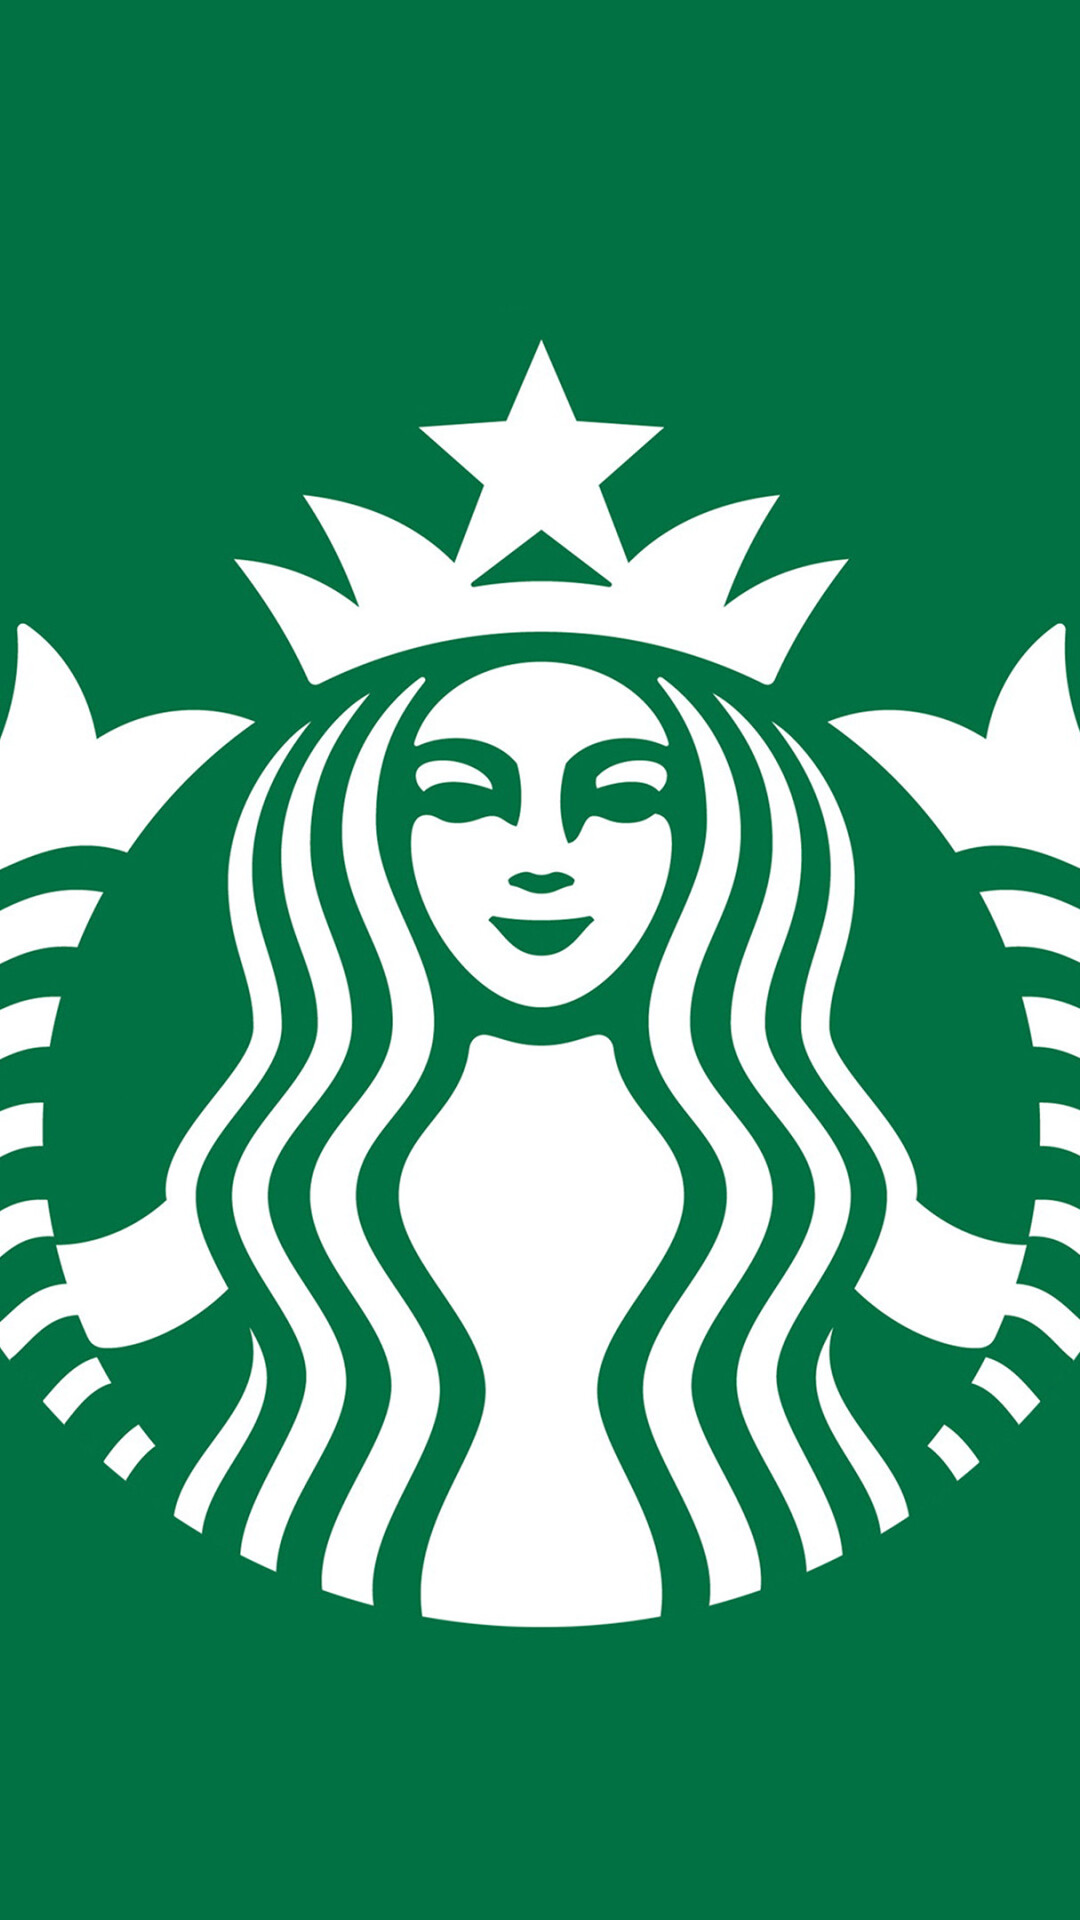 Starbucks: A multi-national corporation that sells coffee drinks, coffee beans, food, and beverages at its retail stores as well as wholesale to other outlets. 1080x1920 Full HD Background.